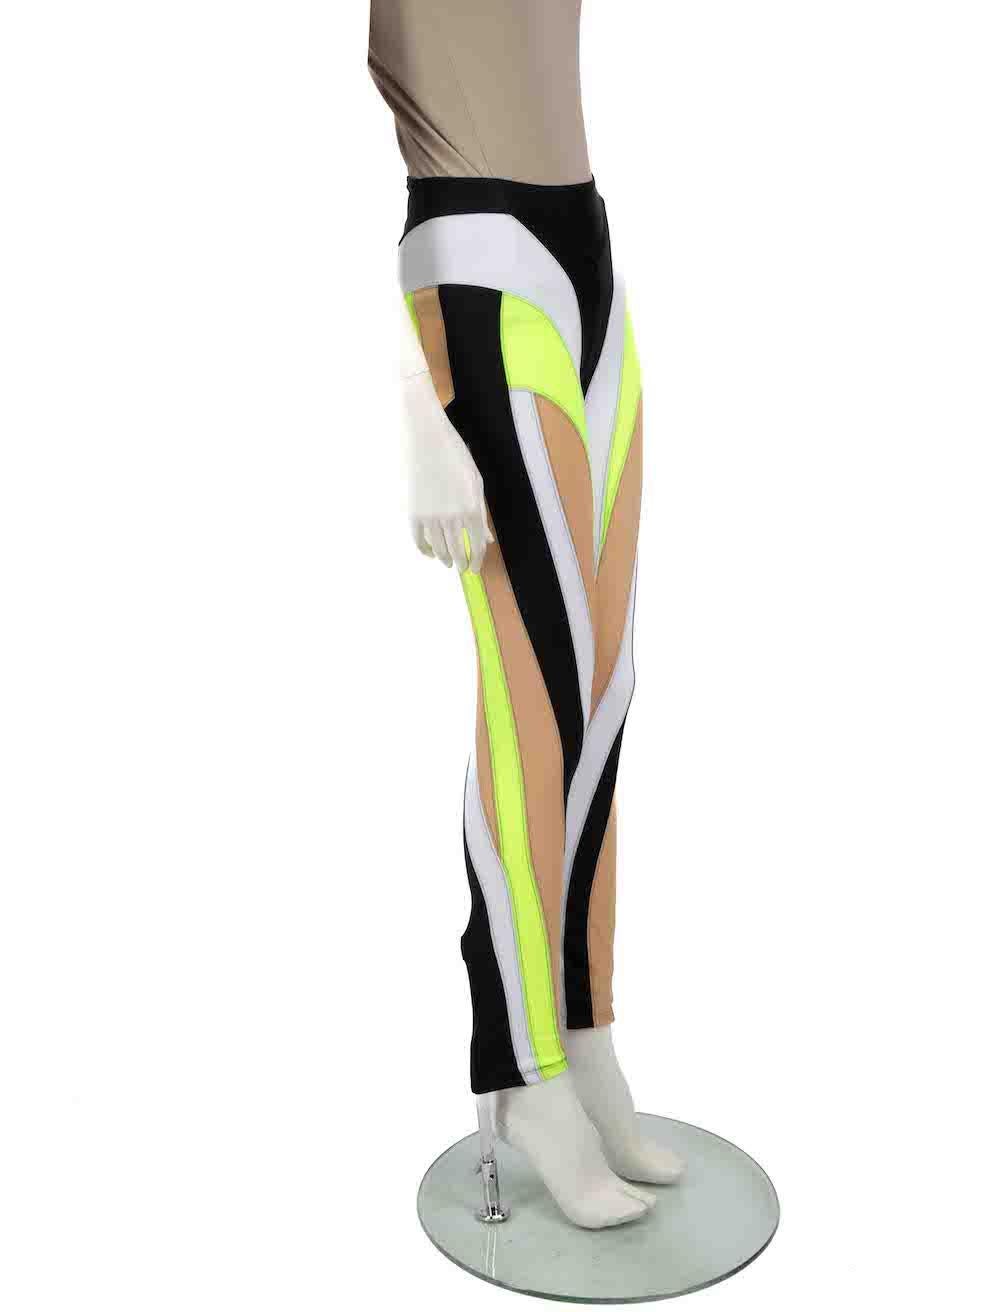 CONDITION is Never worn. No visible wear to leggings is evident on this new Mugler designer resale item.
 
 
 
 Details
 
 
 Multicolour
 
 Synthetic
 
 Leggings
 
 Spiral striped pattern
 
 High rise
 
 
 
 
 
 Made in Bulgaria
 
 
 
 Composition
